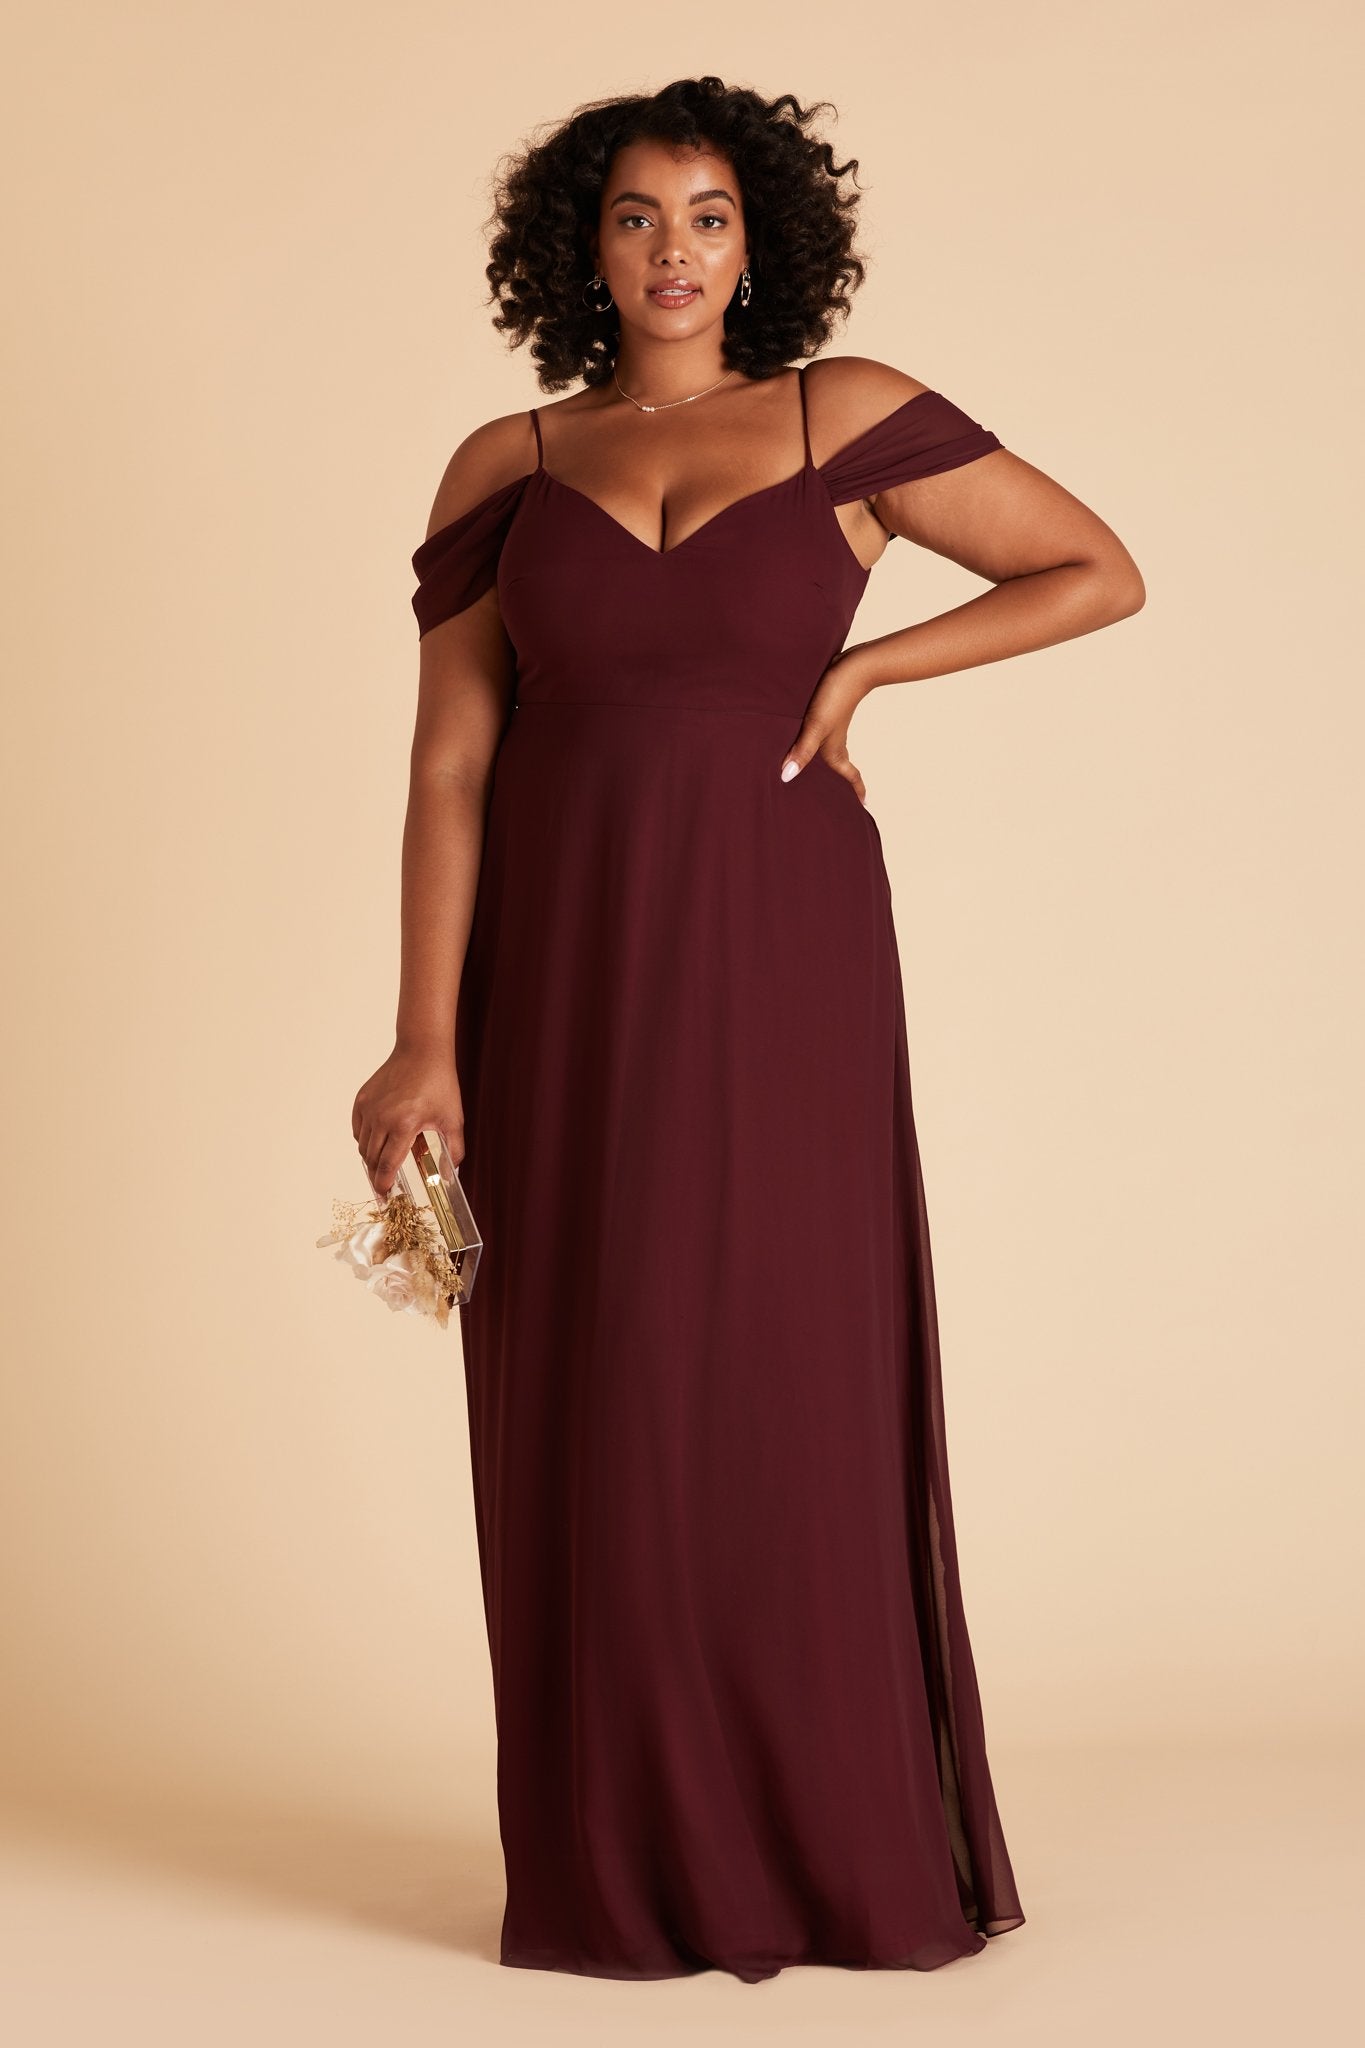 Devin convertible plus size bridesmaid dress in cabernet burgundy chiffon by Birdy Grey, front view